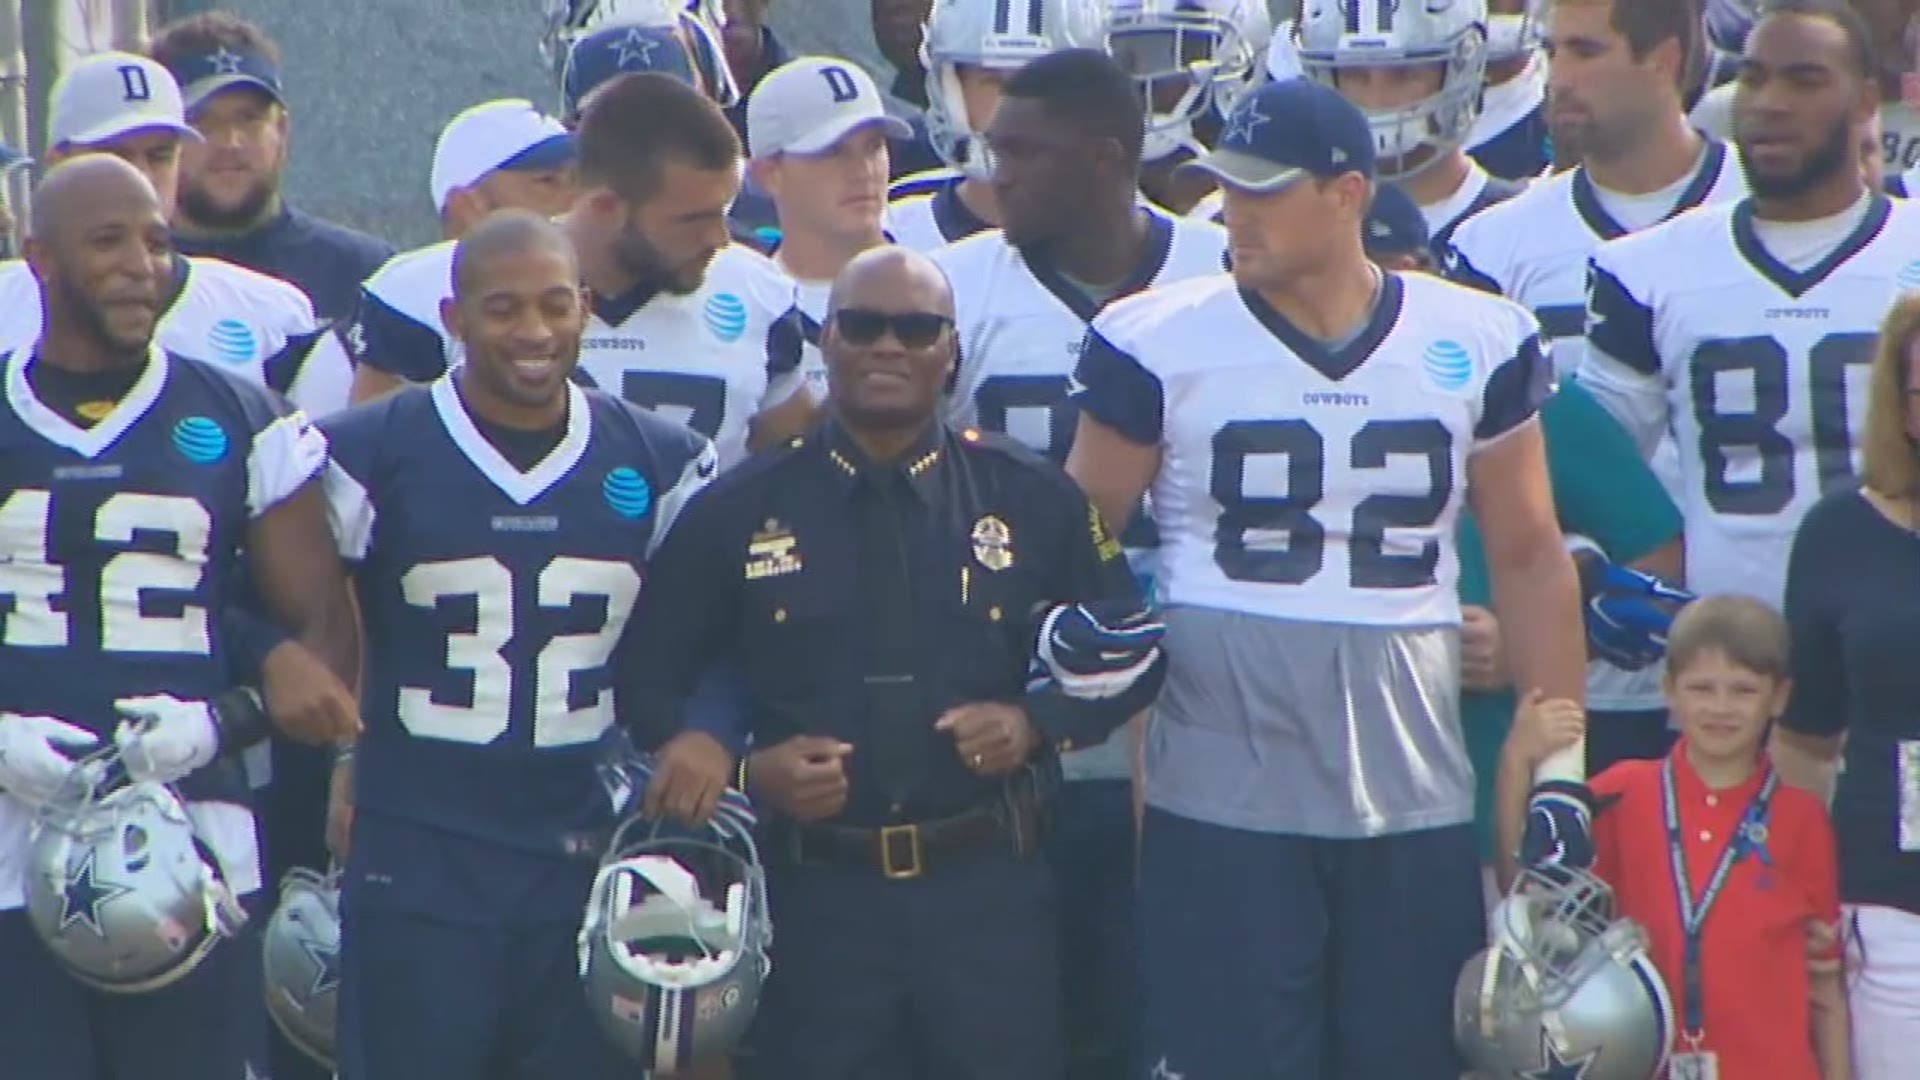 Dallas Police Chief David Brown walked onto the practice field in Oxnard Saturday, locking arms with Cowboys players.